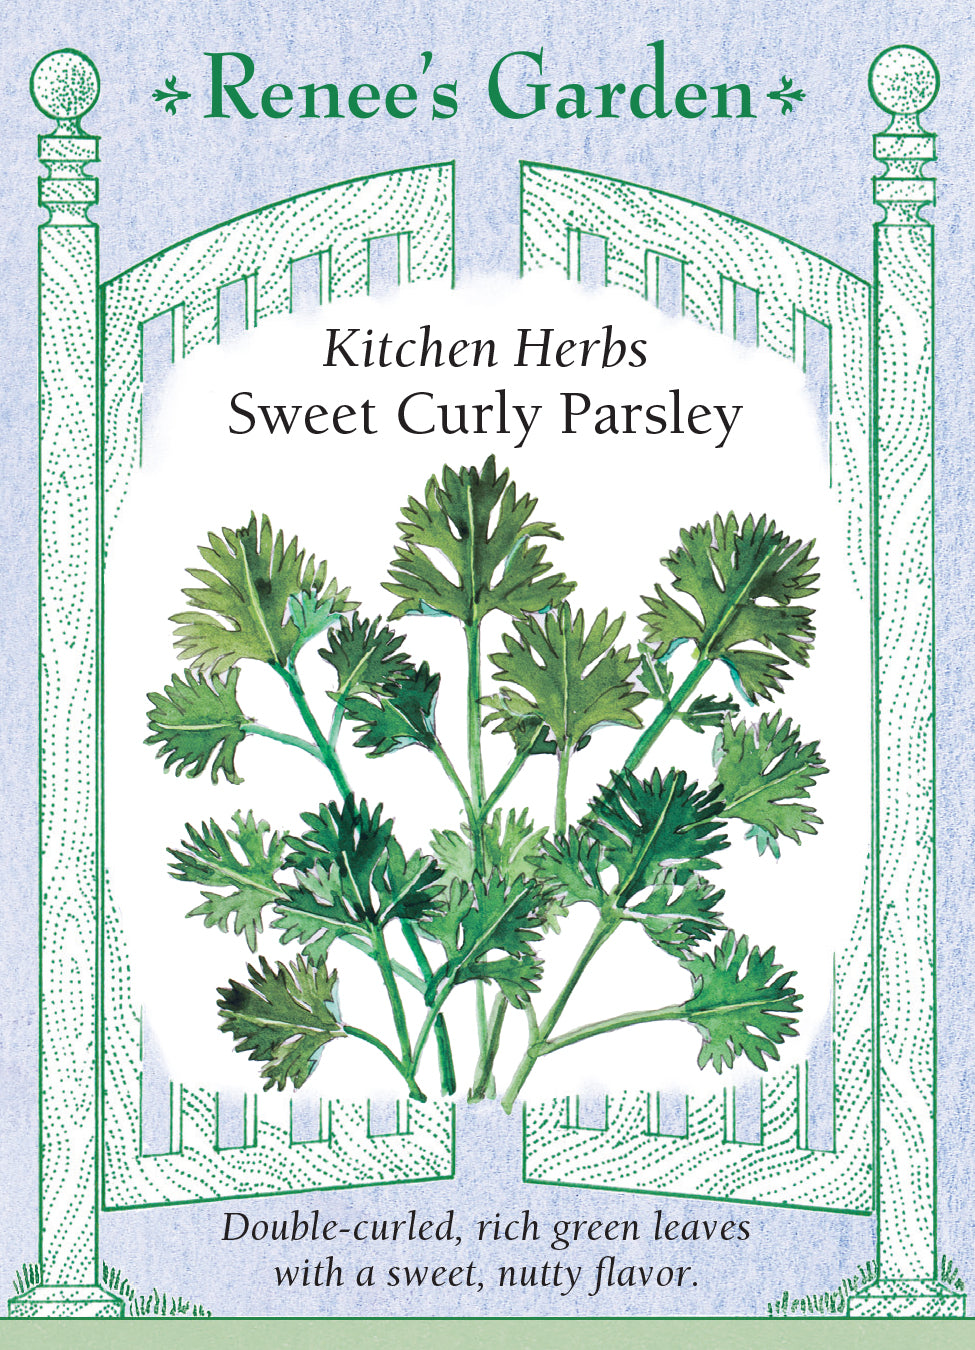 Sweet Curly Parsley